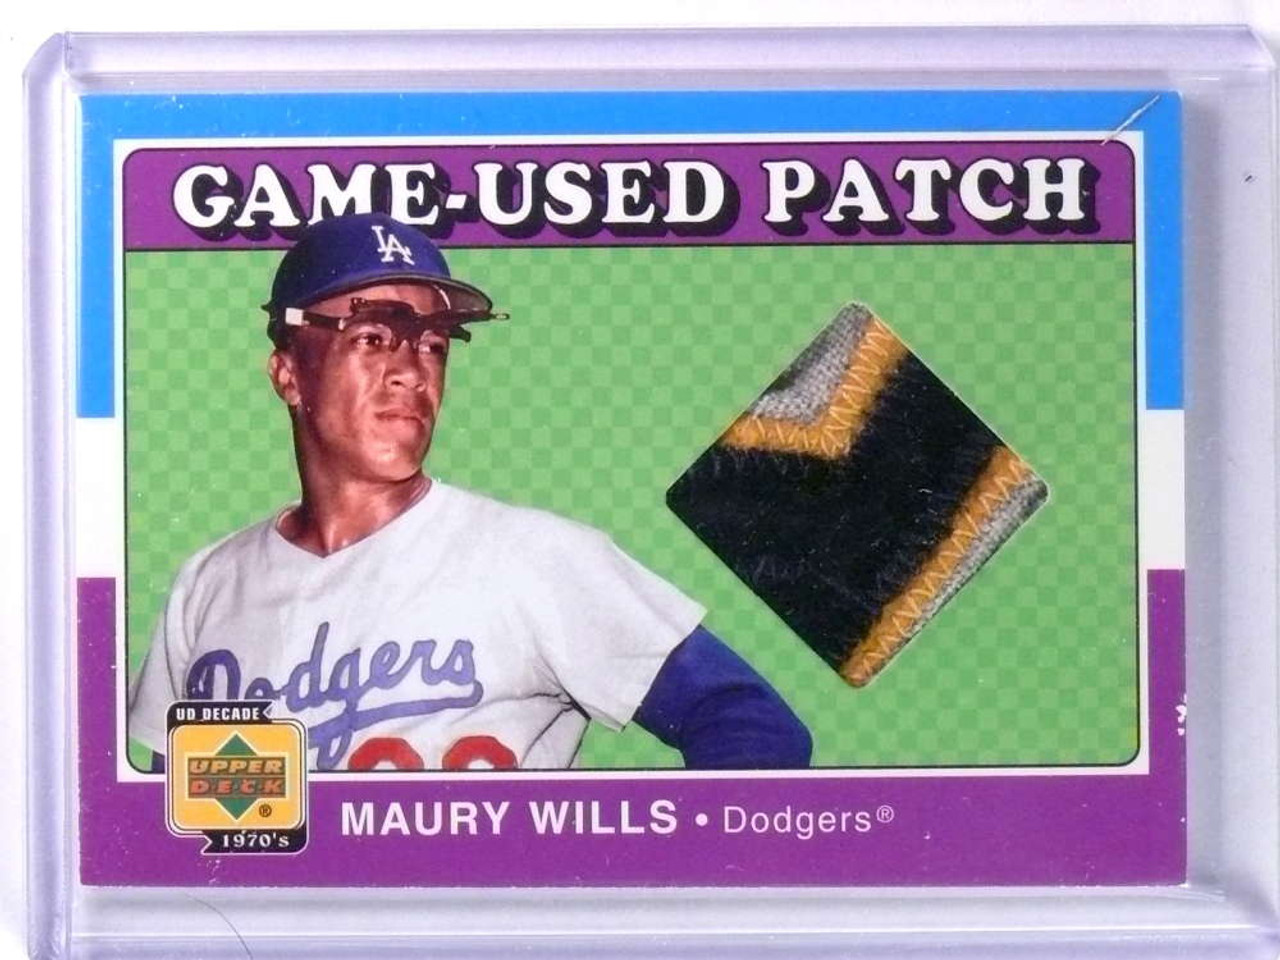 2001 Upper Deck Decade Game-Used Patch Maury Wills 3clr Patch #PMW